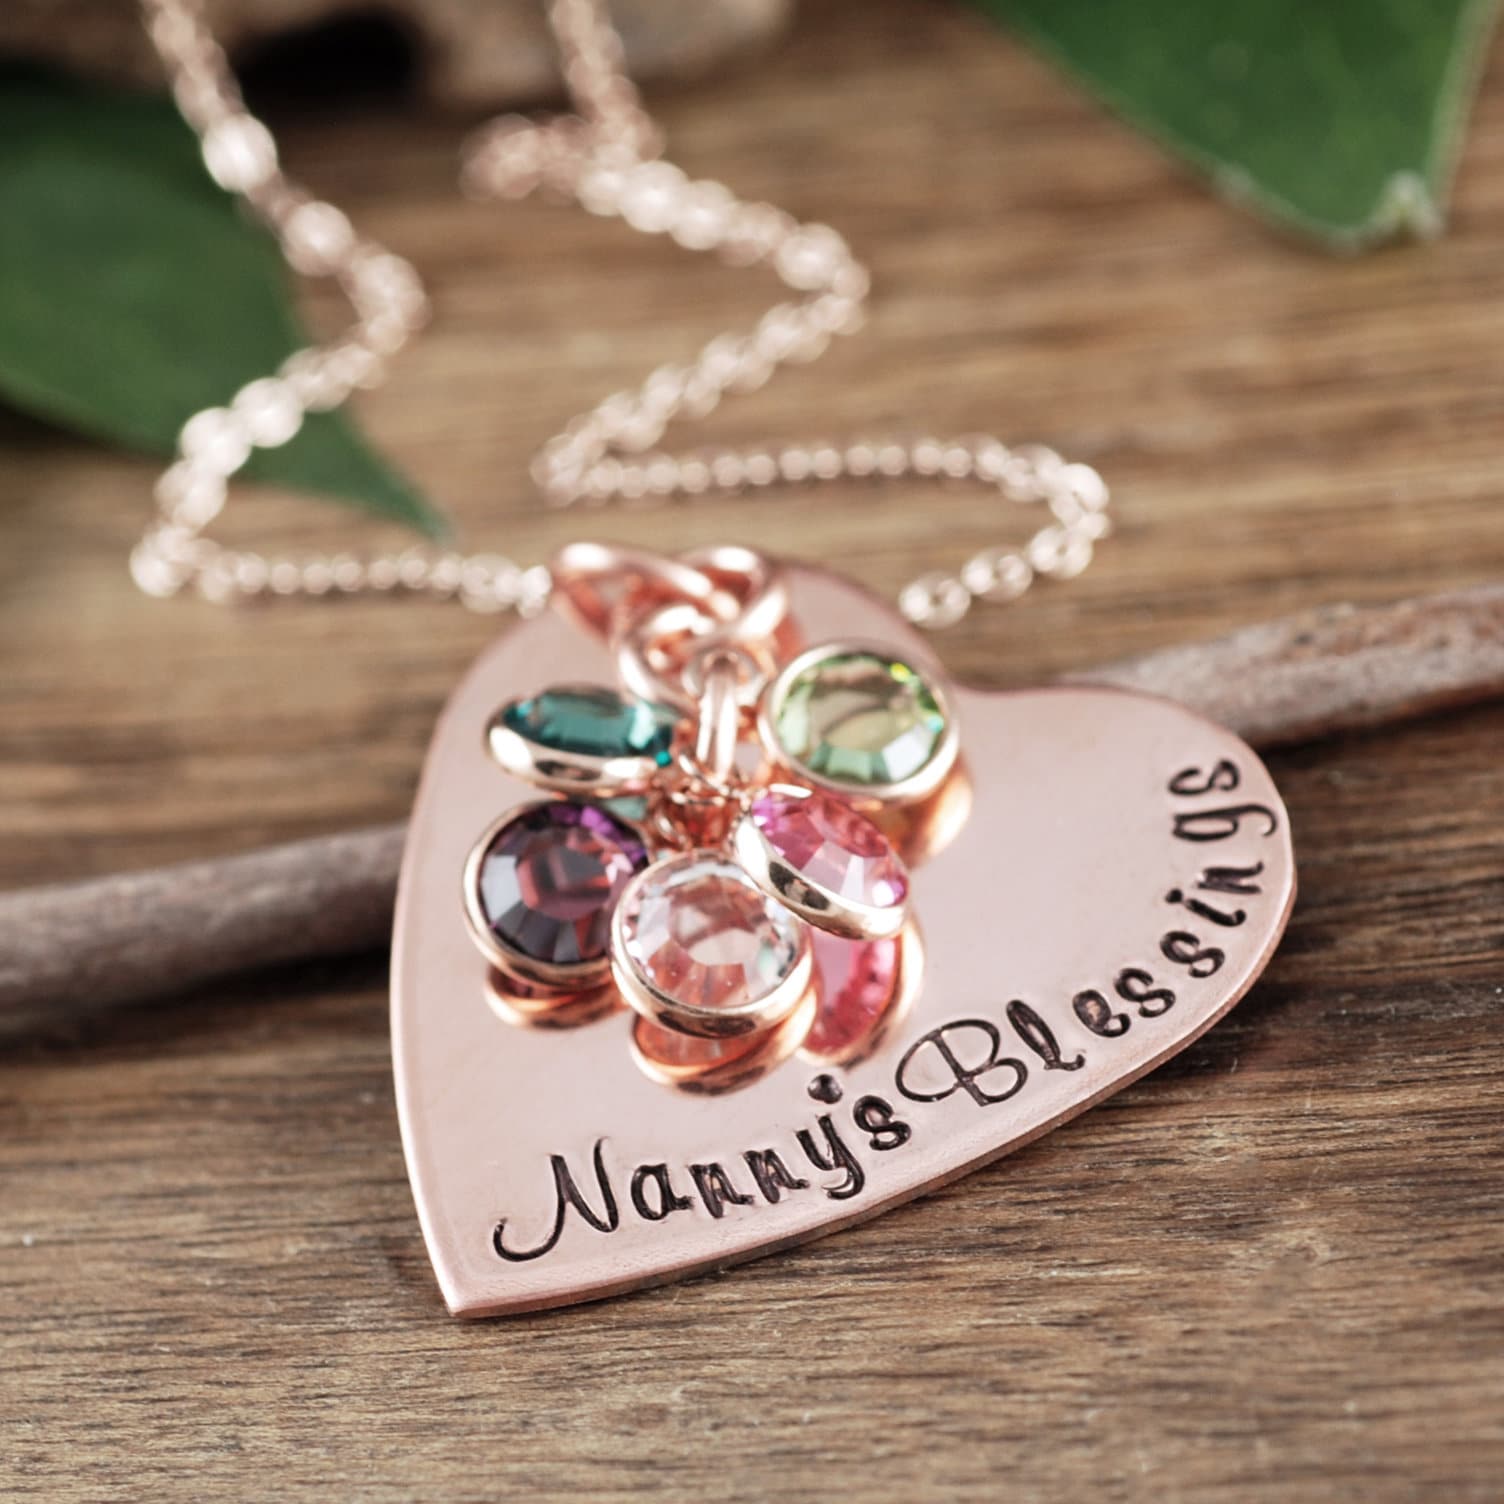 personalized birthstone jewelry for grandmothers